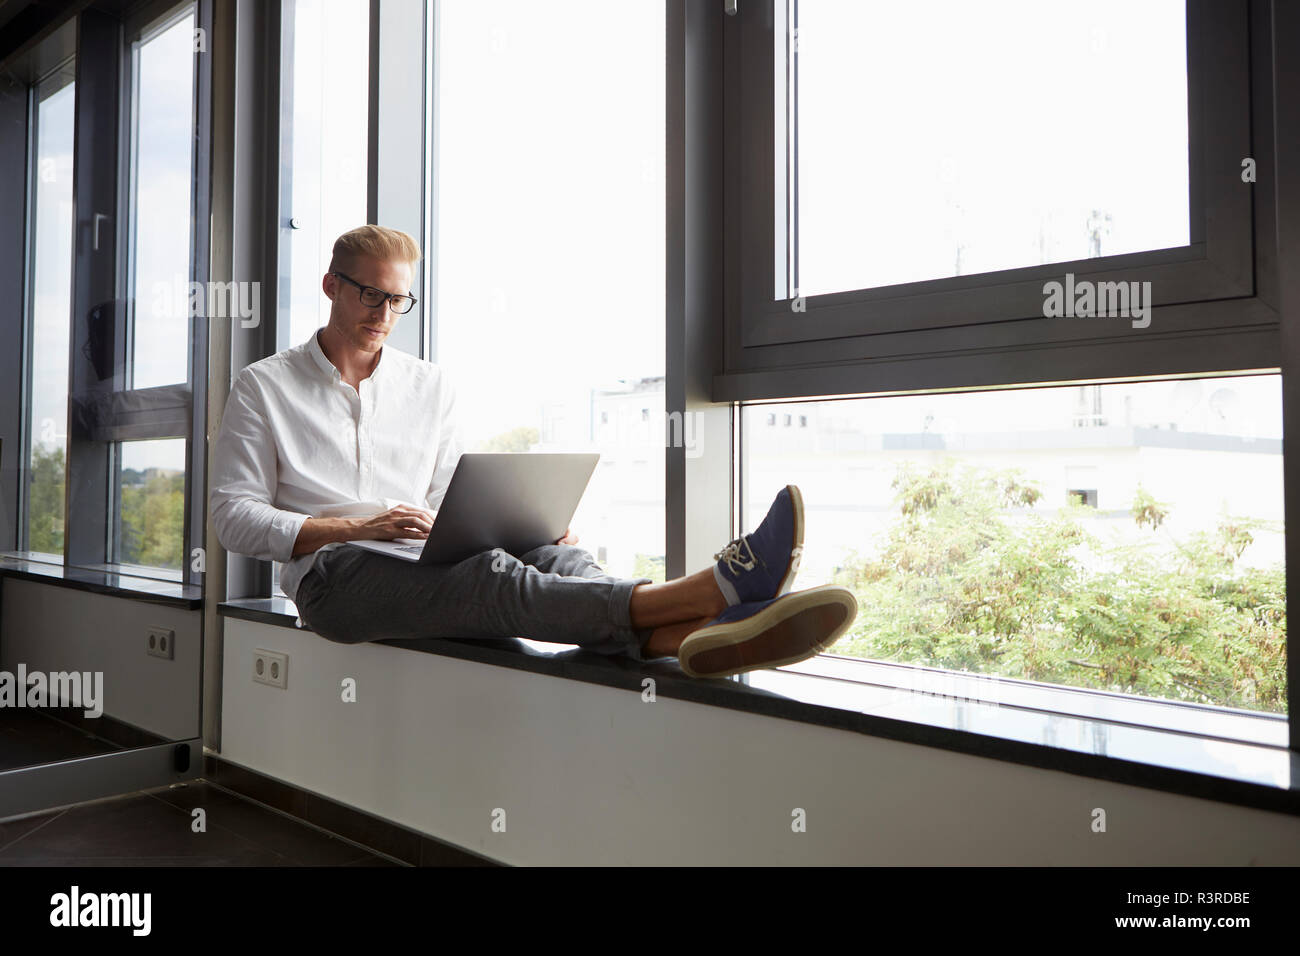 Businessman sitting on windowsill using laptop Banque D'Images